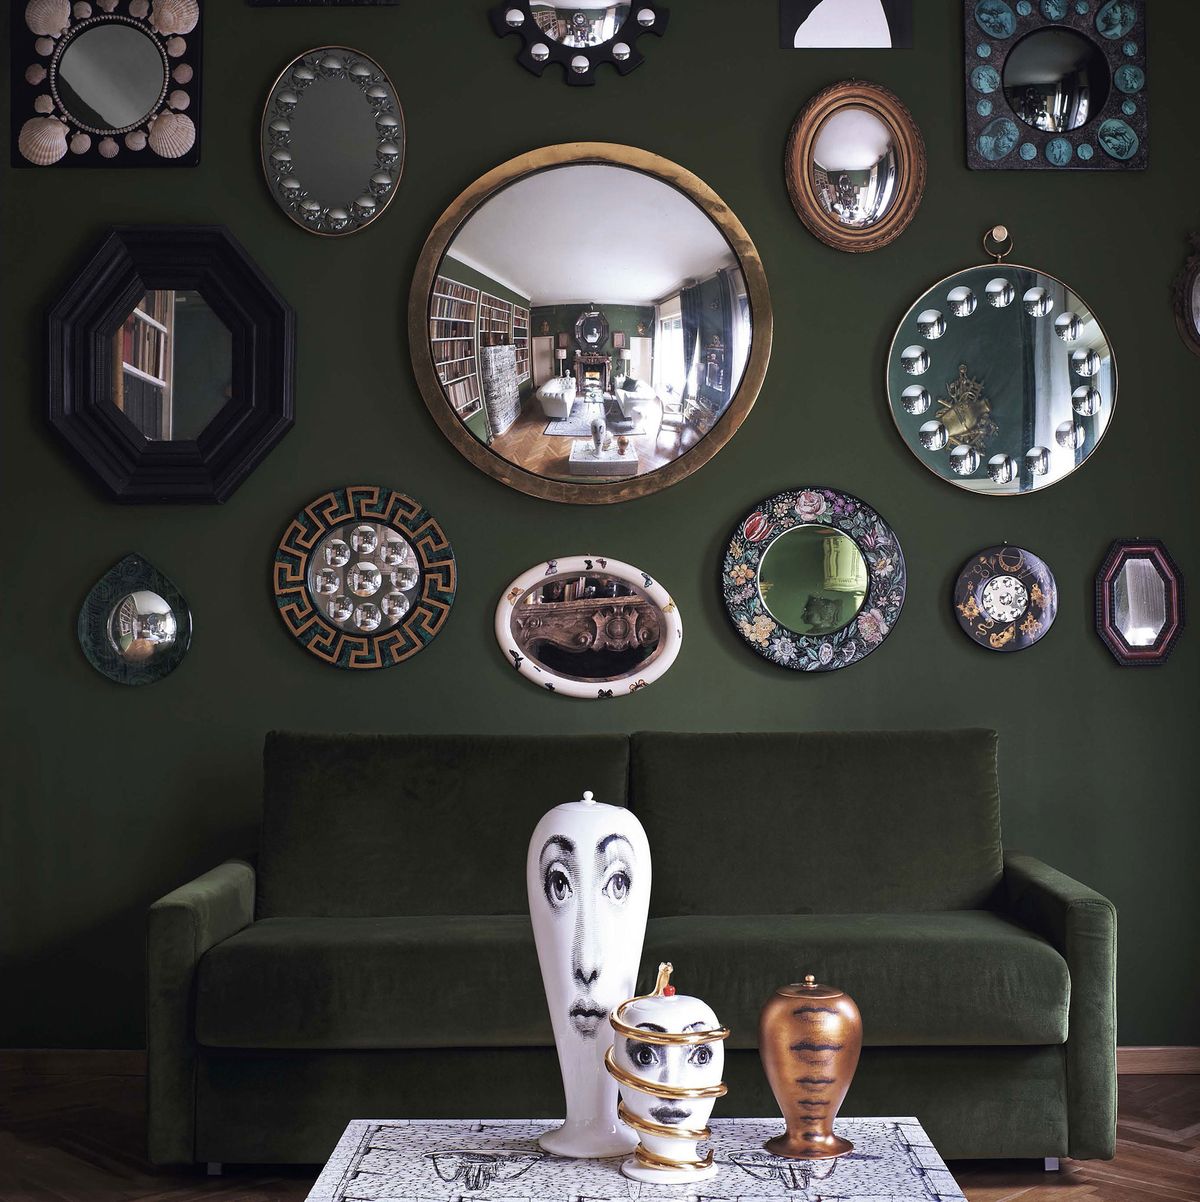 green velvet sofa against a dark green wall with round frames and mirrors of all sizes and shapes and on the low white cocktail table are classic fornasetti objects with faces on them